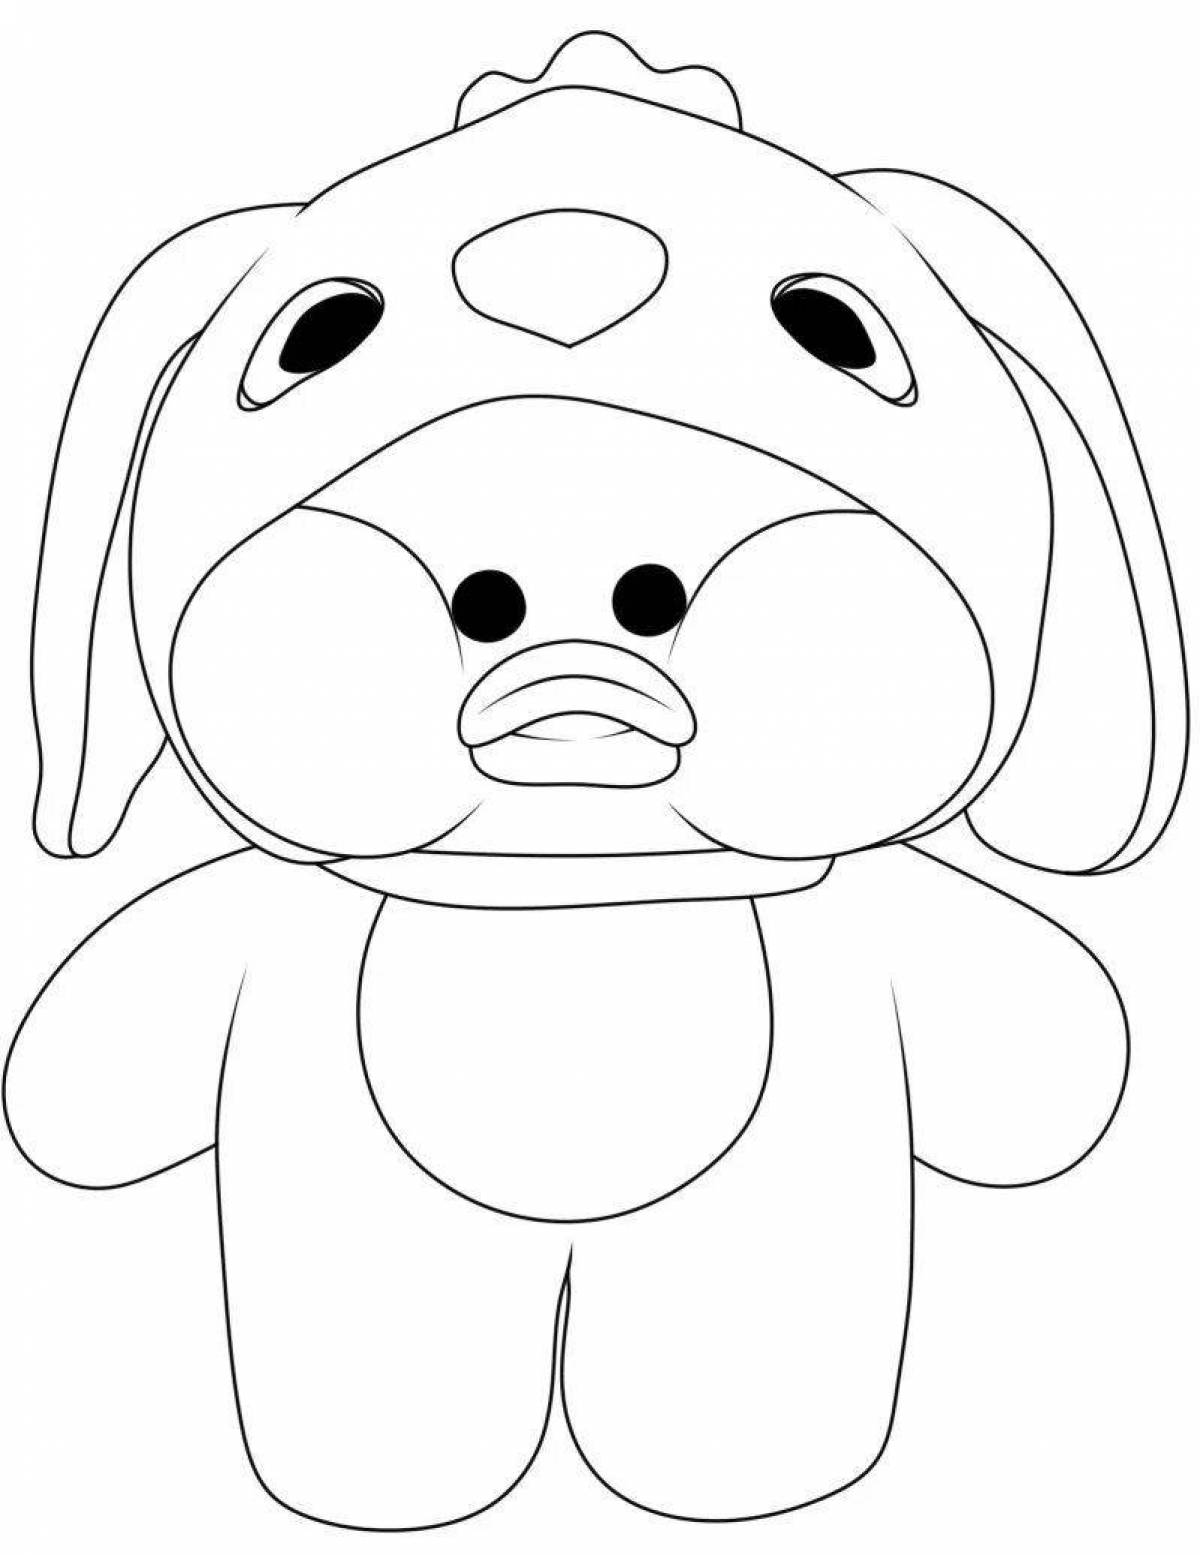 Coloring page lalafanfan big duck coloring page